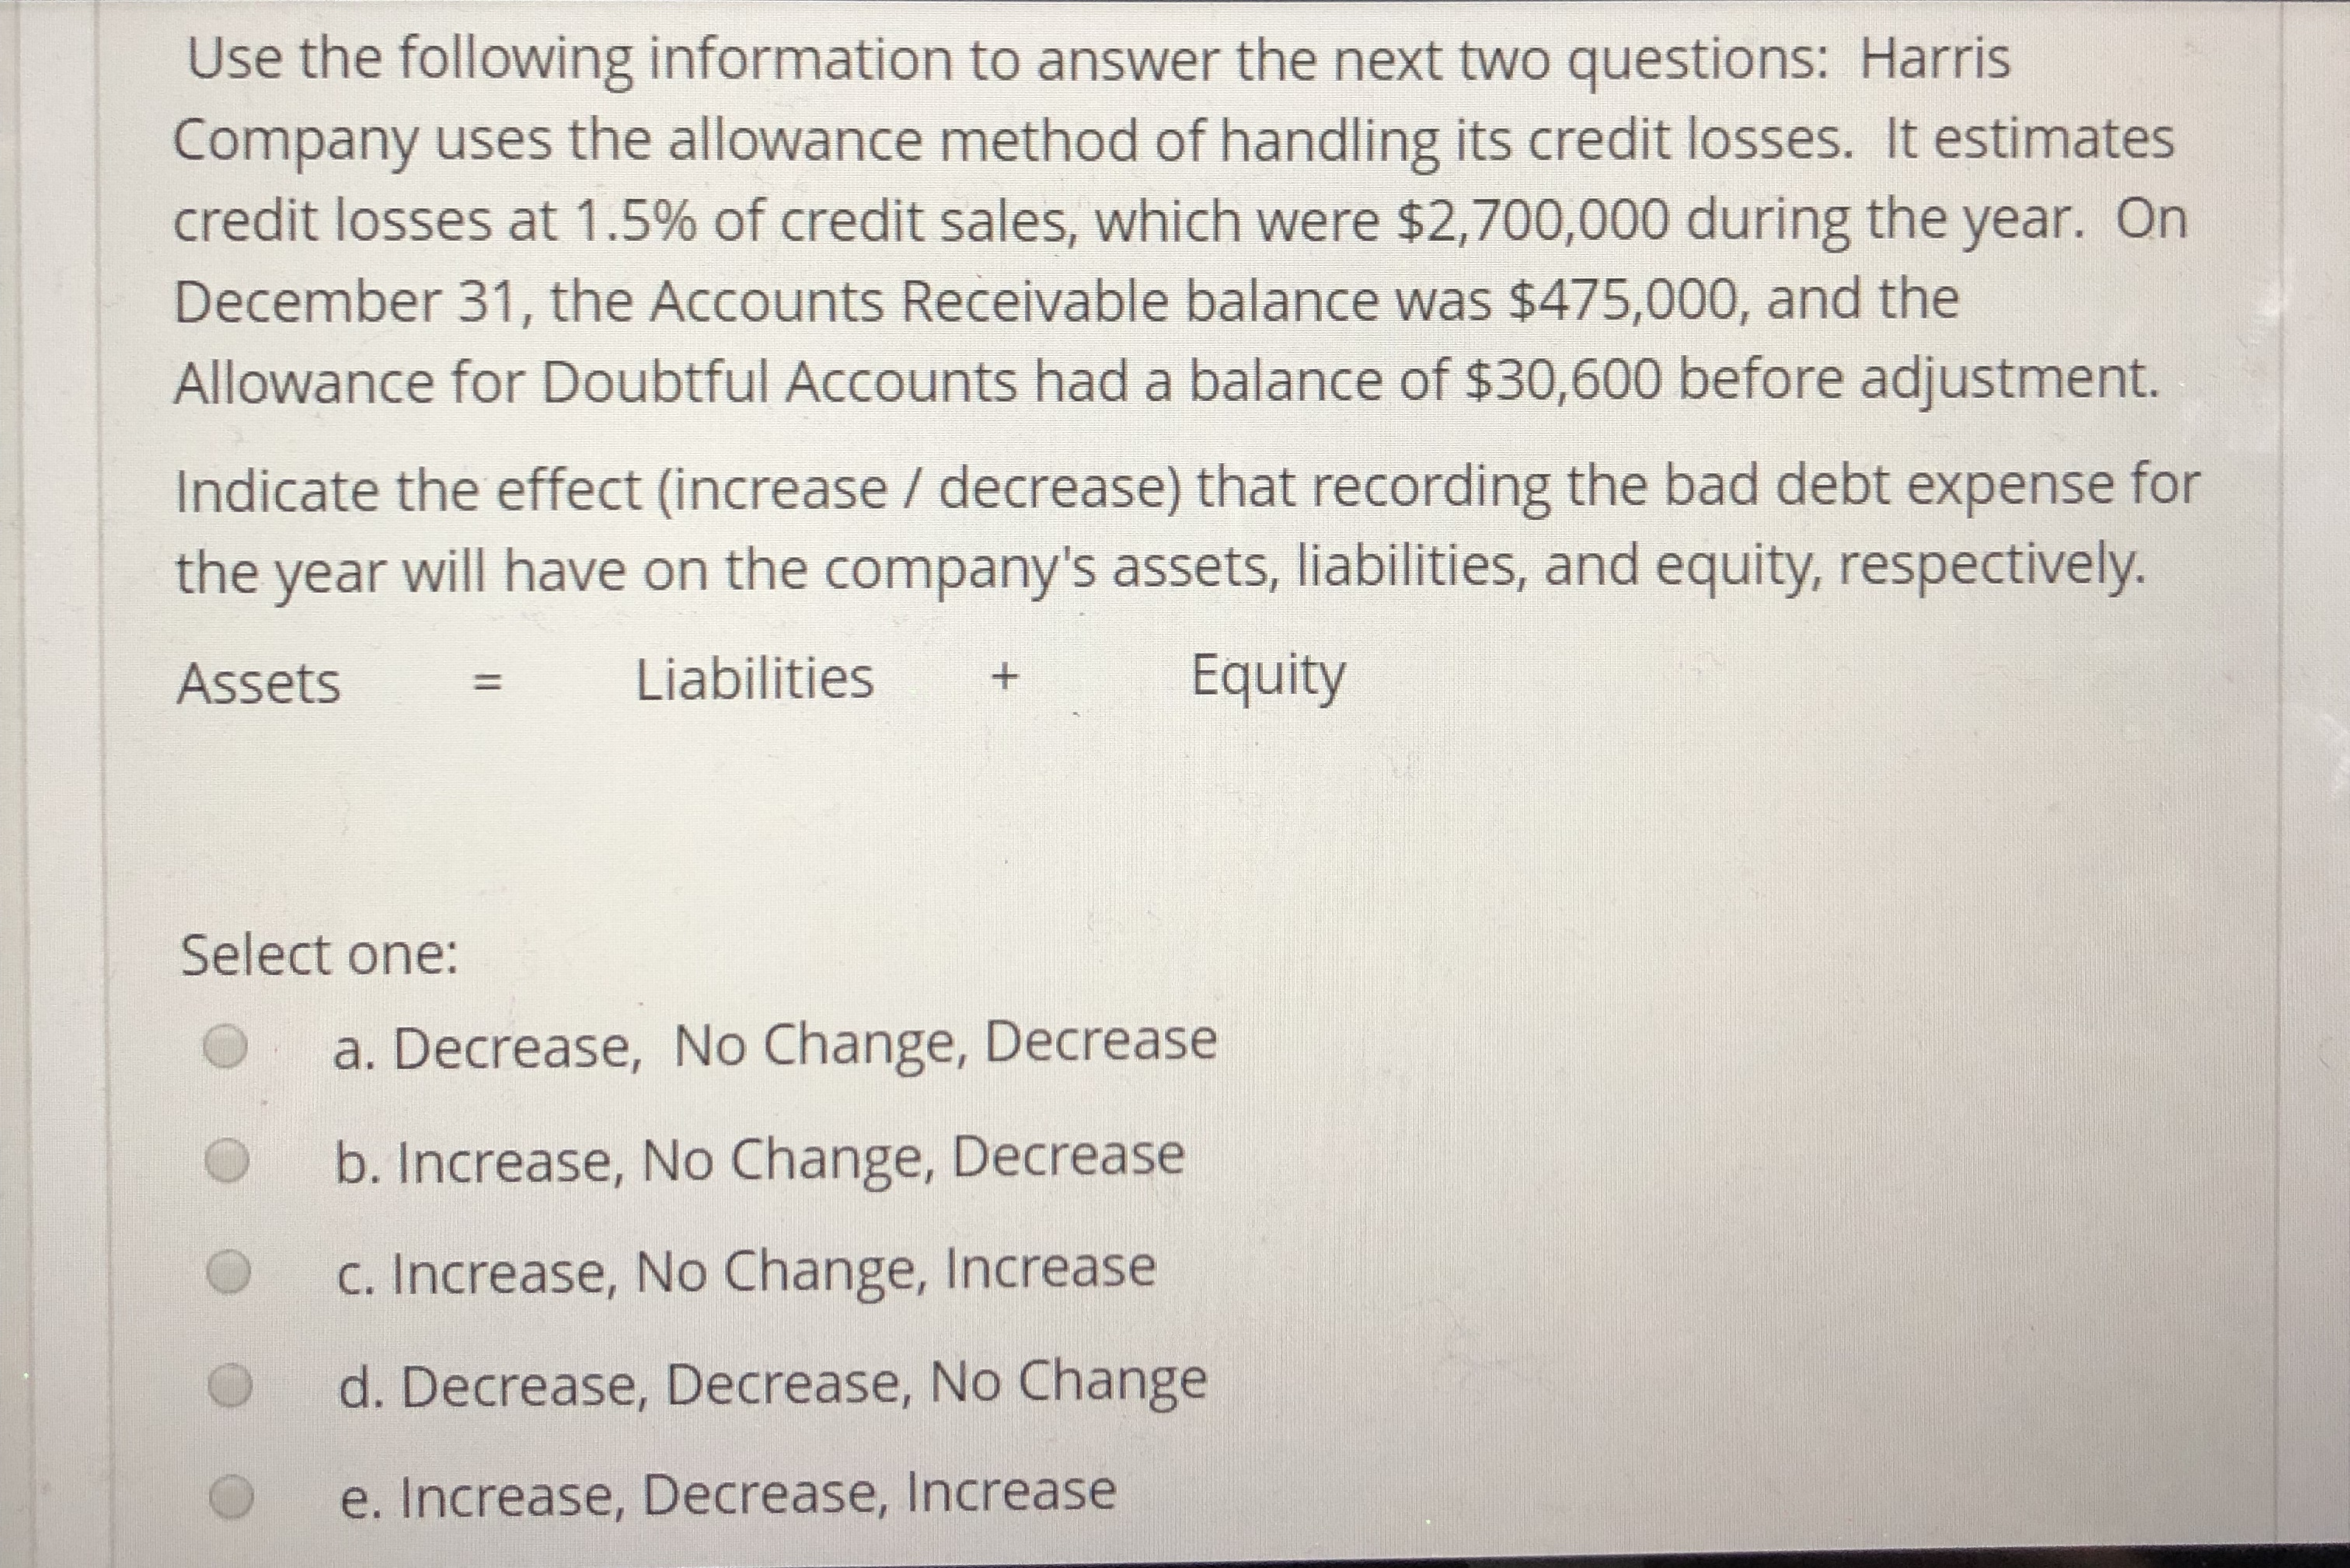 Use the following information to answer the next two questions: Harris
Company uses the allowance method of handling its credit losses. It estimates
credit losses at 1.5% of credit sales, which were $2,700,000 during the year. On
December 31, the Accounts Receivable balance was $475,000, and the
Allowance for Doubtful Accounts had a balance of $30,600 before adjustment.
Indicate the effect (increase / decrease) that recording the bad debt expense for
the year will have on the company's assets, liabilities, and equity, respectively.
Assets Liabilities
Equity
Select one:
a. Decrease, No Change, Decrease
b. Increase, No Change, Decrease
C. Increase, No Change, Increase
O
O d. Decrease, Decrease, No Change
e. Increase, Decrease, lncrease
